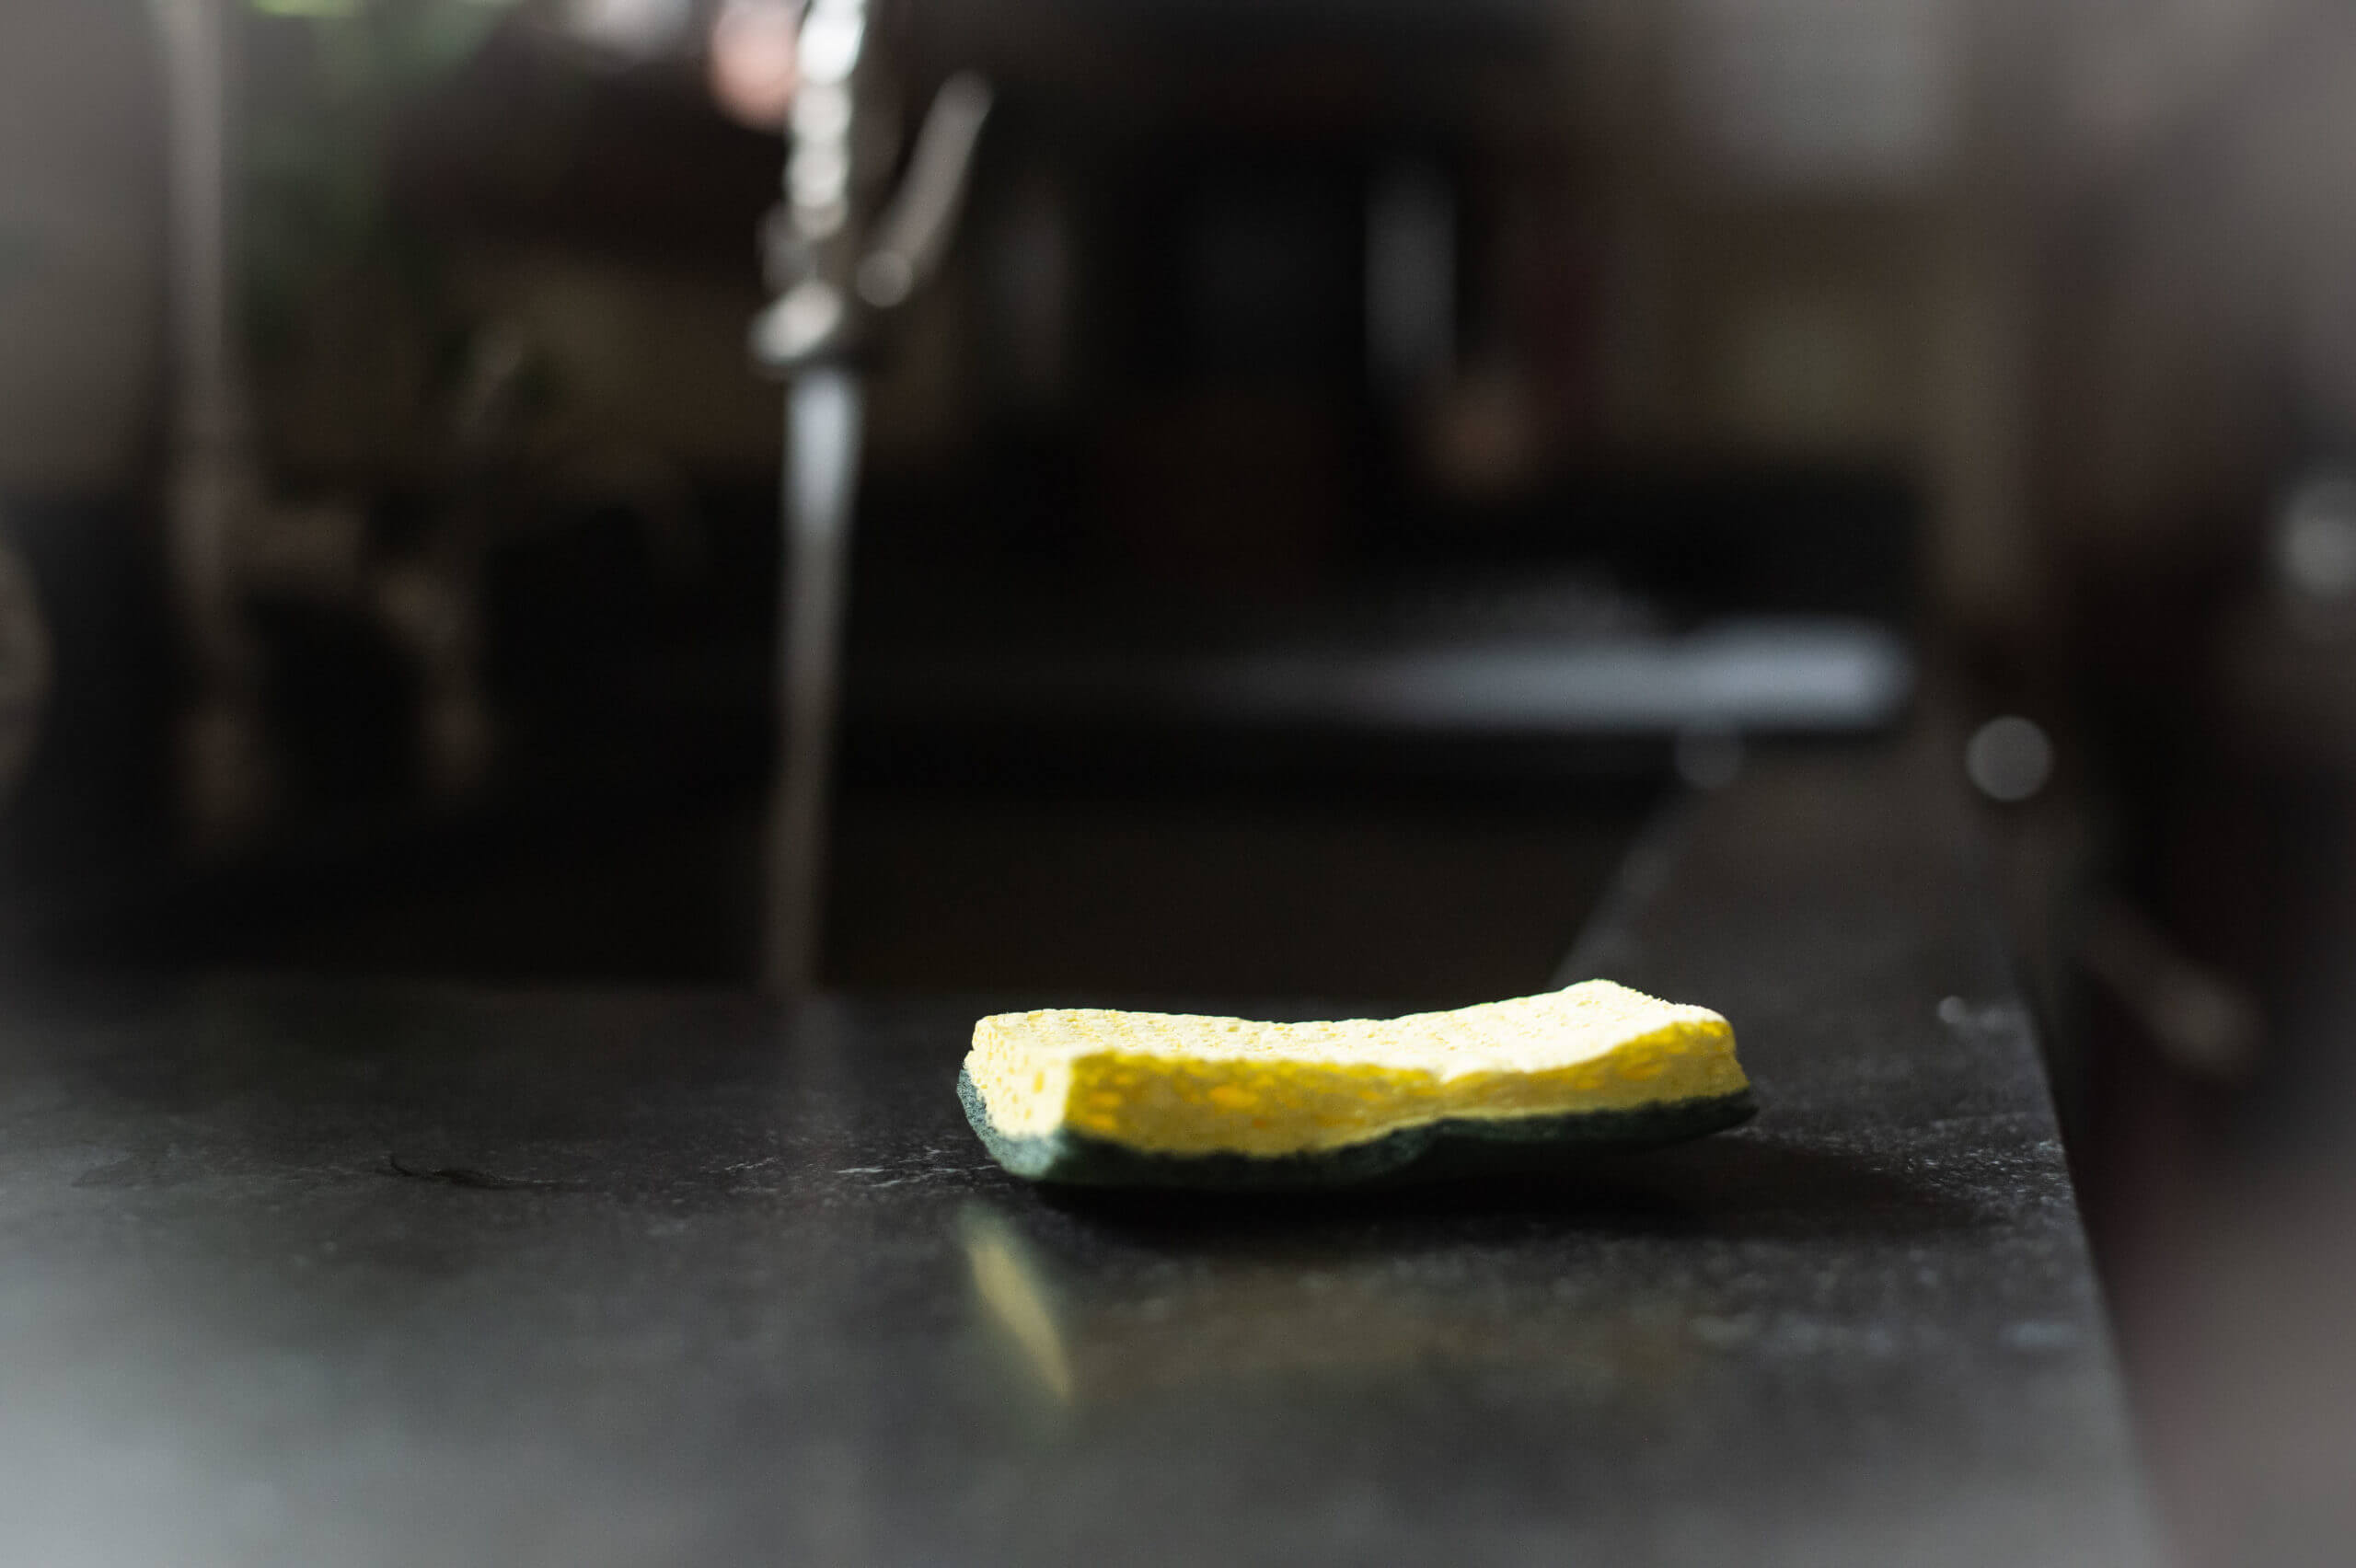 Color image of a yellow sponge on a black countertop next to a kitchen sink. The faucet is running.